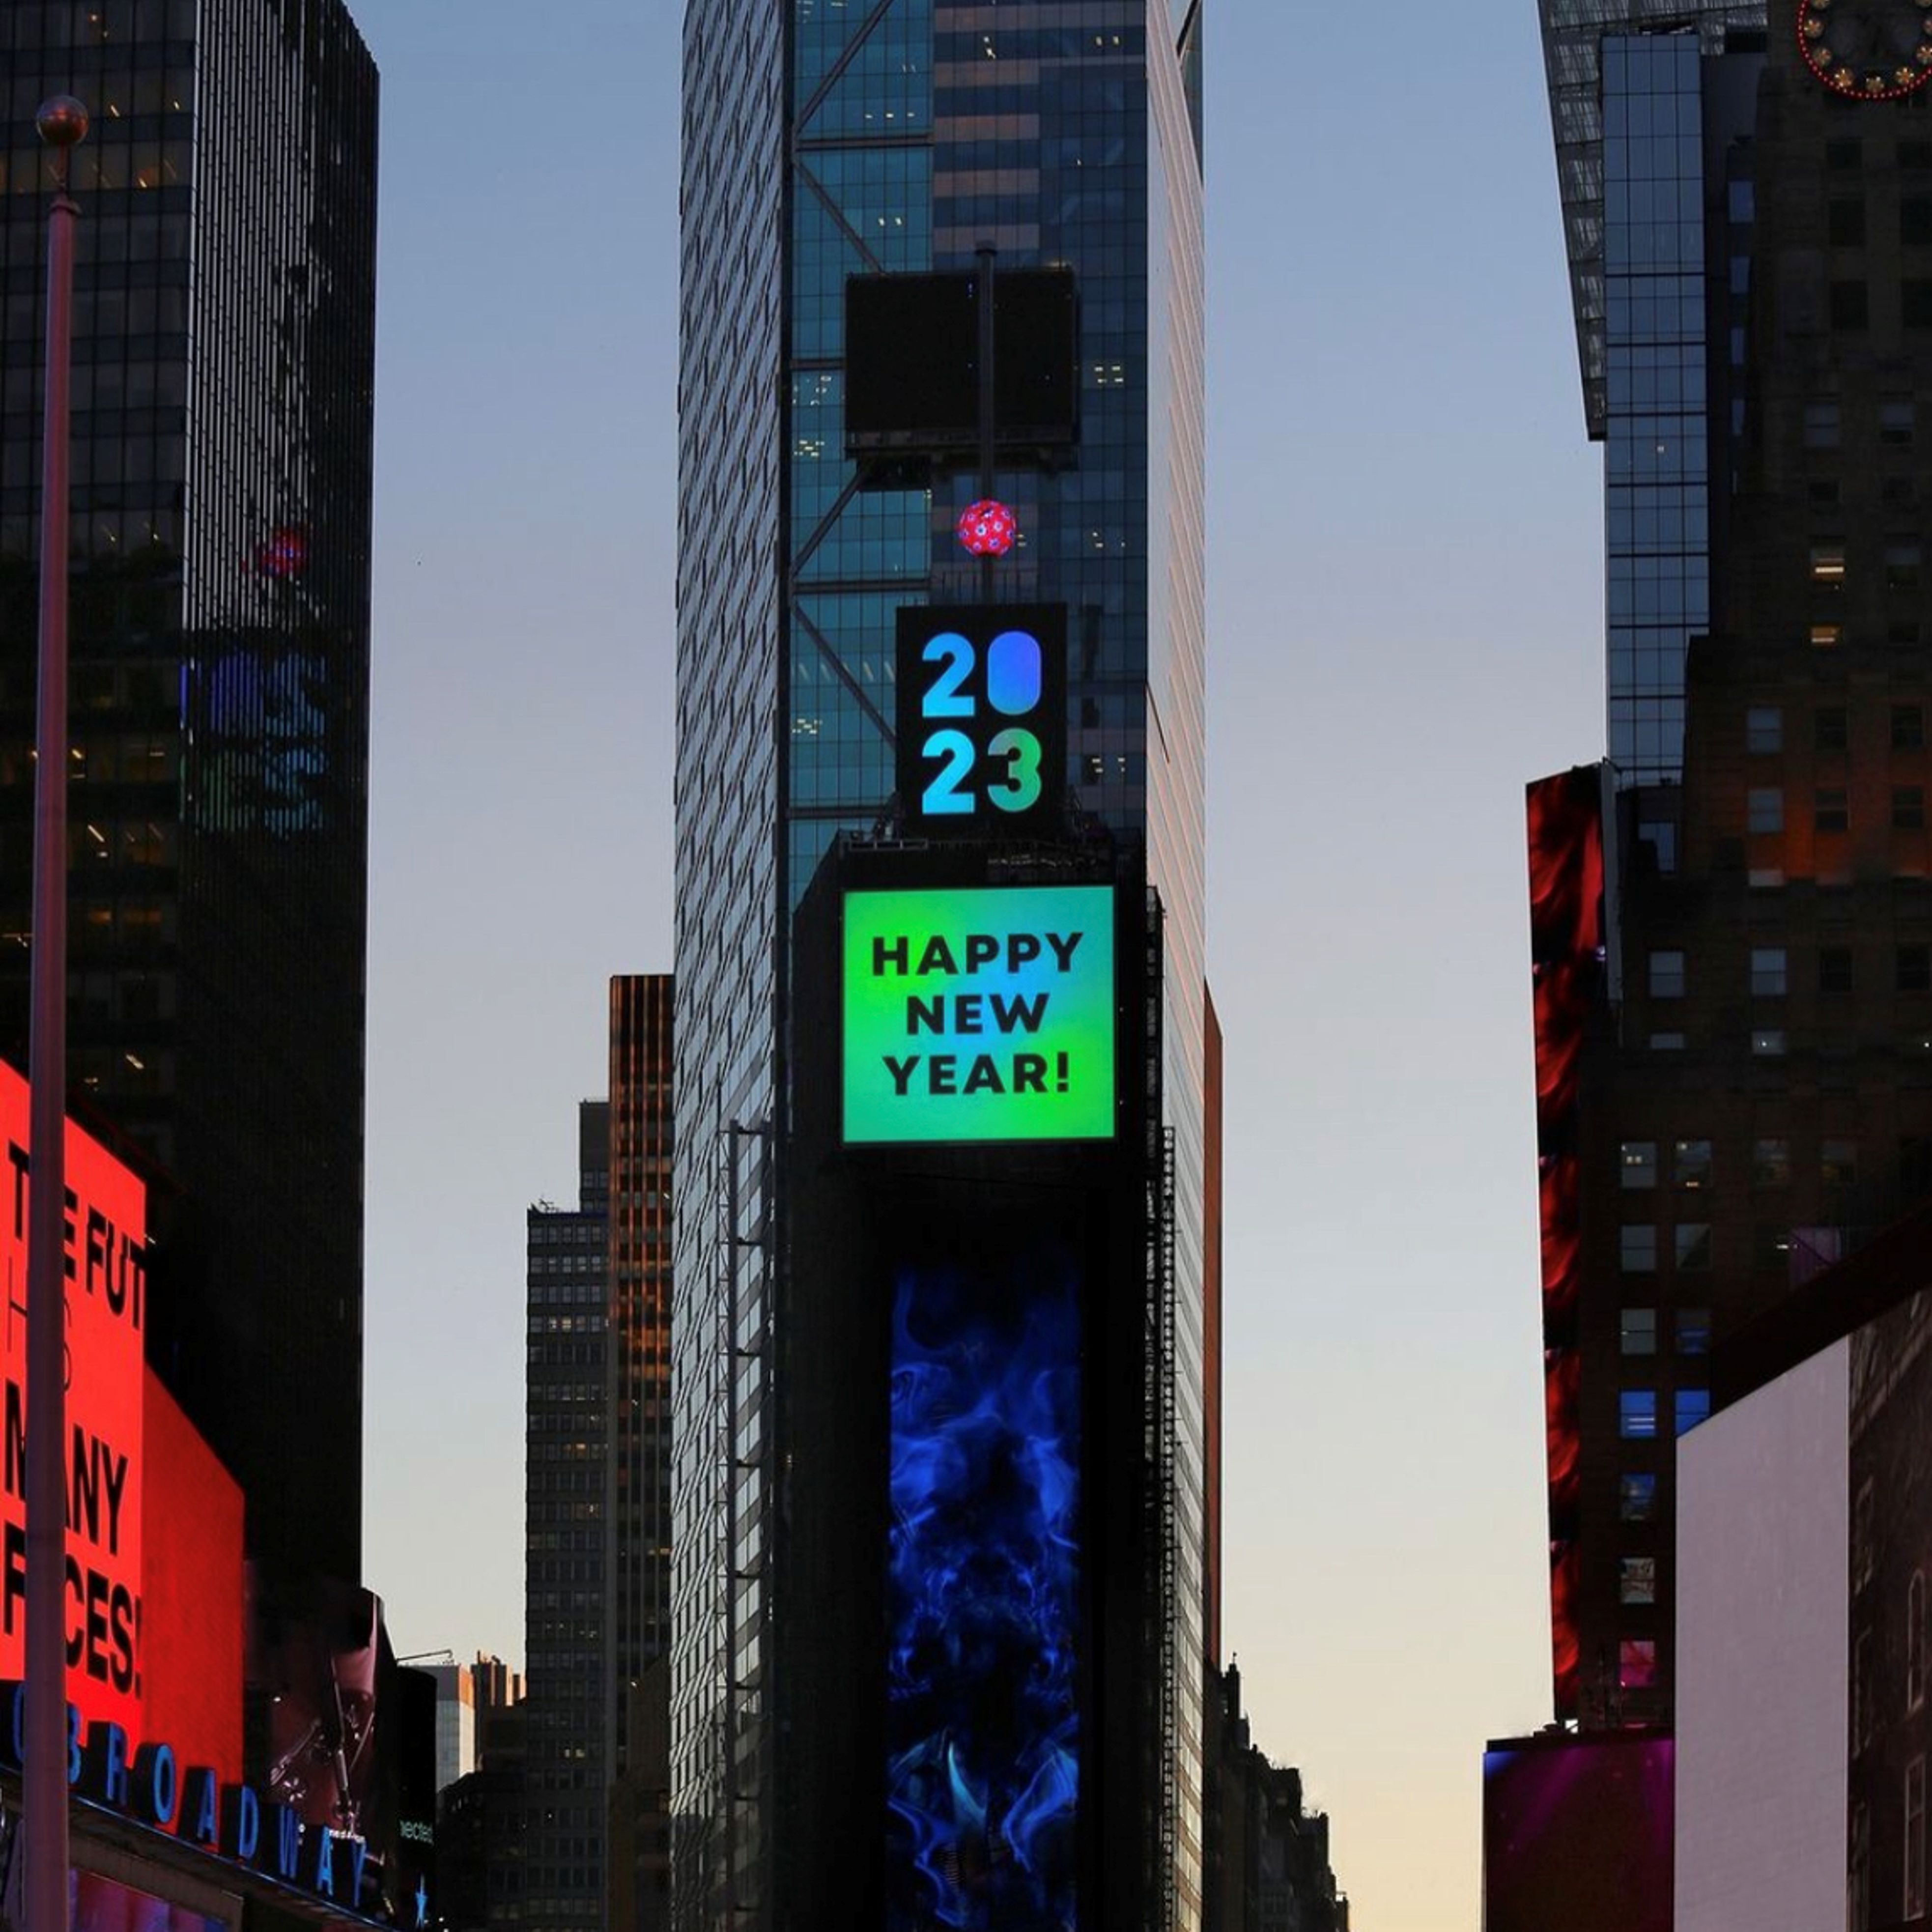 Times Square on New Years Eve